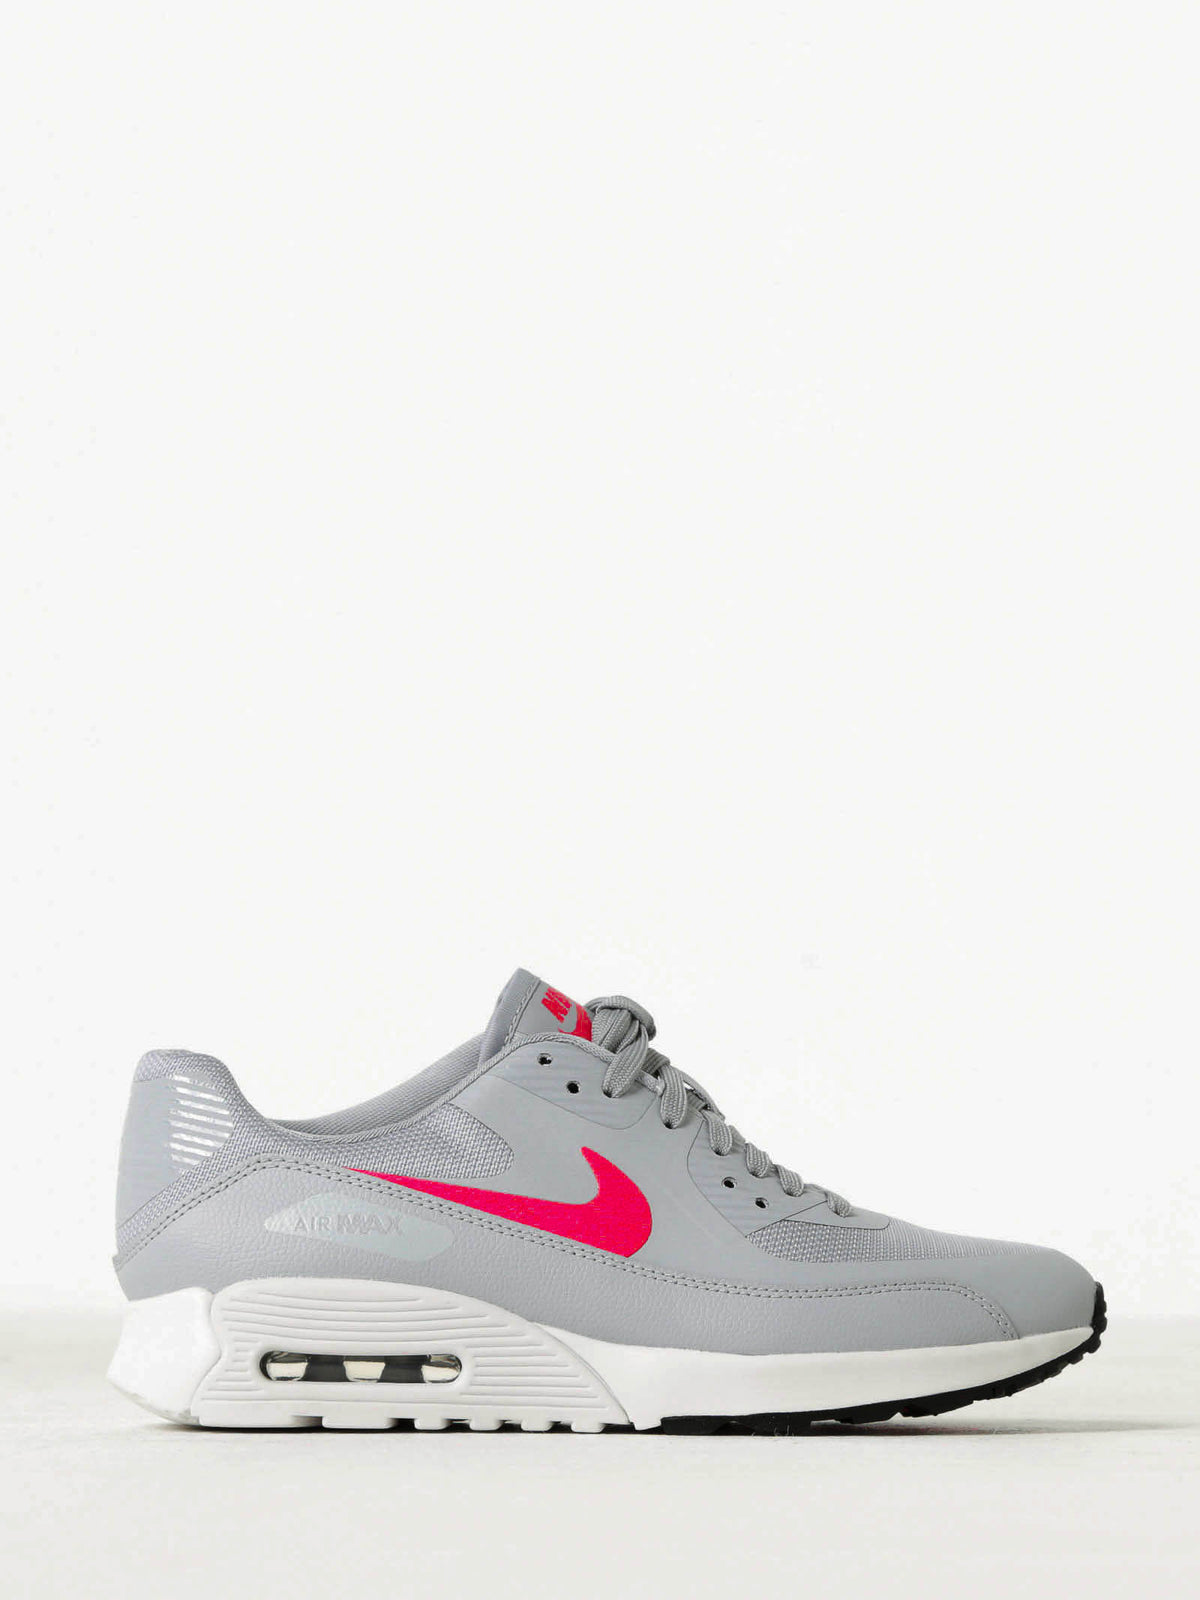 Womens Air Max 90 Ultra 2.0 Sneakers in Grey &amp; Bright Pink